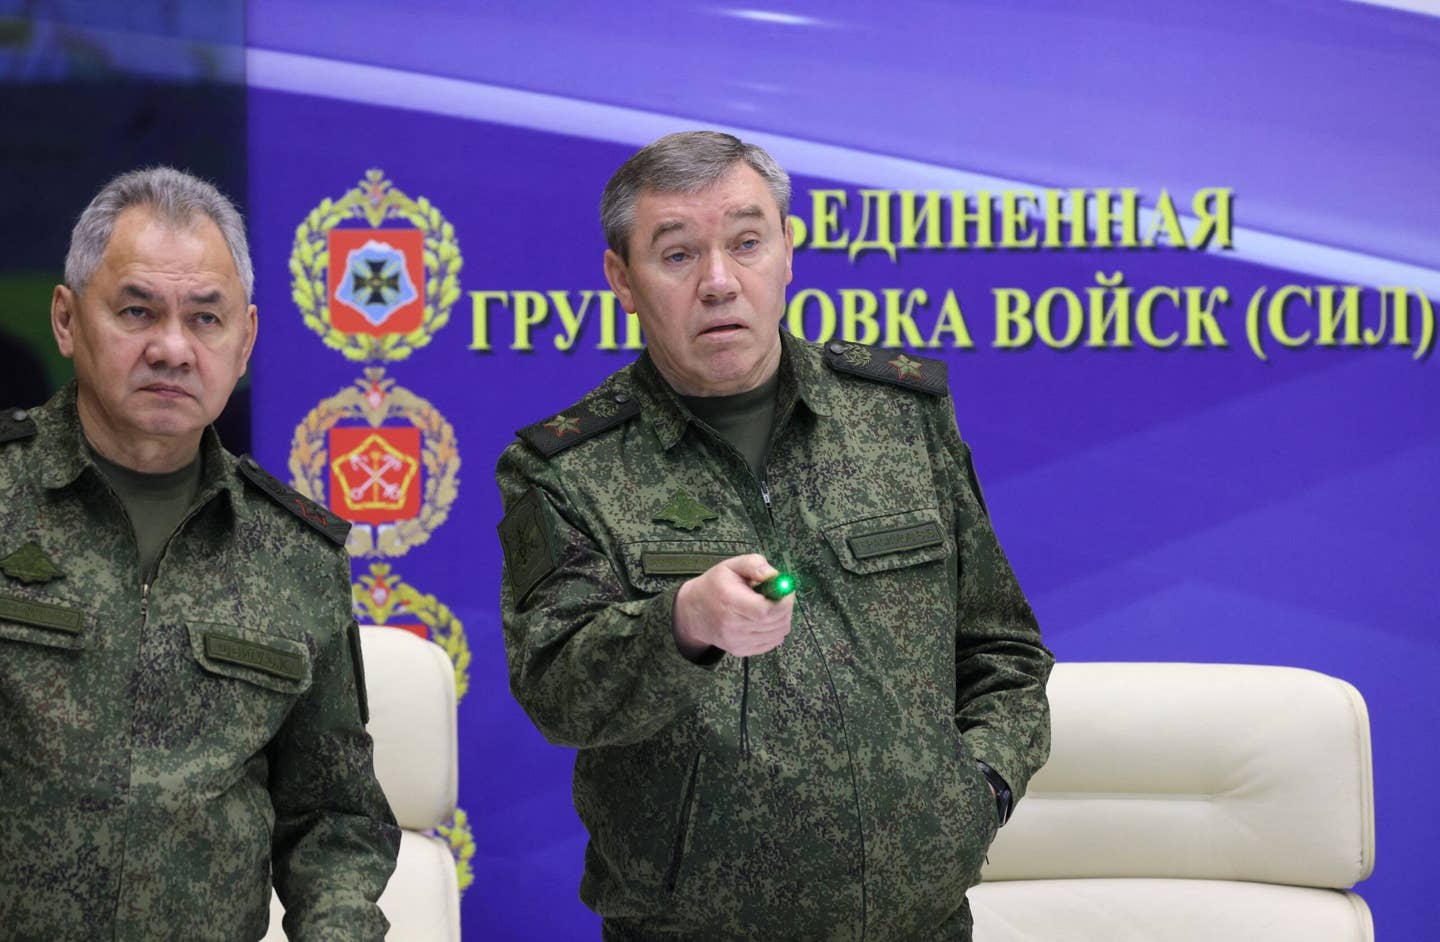 Russian Defence Minister Sergei Shoigu (L) and chief of the Russian General Staff Valery Gerasimov (R) were targets of an attempted captured by Wagner boss Yevgeny Prigozhin, <em>The Wall Street Journal</em> reported Wednesday. (Photo by GAVRIIL GRIGOROV/Sputnik/AFP via Getty Images)